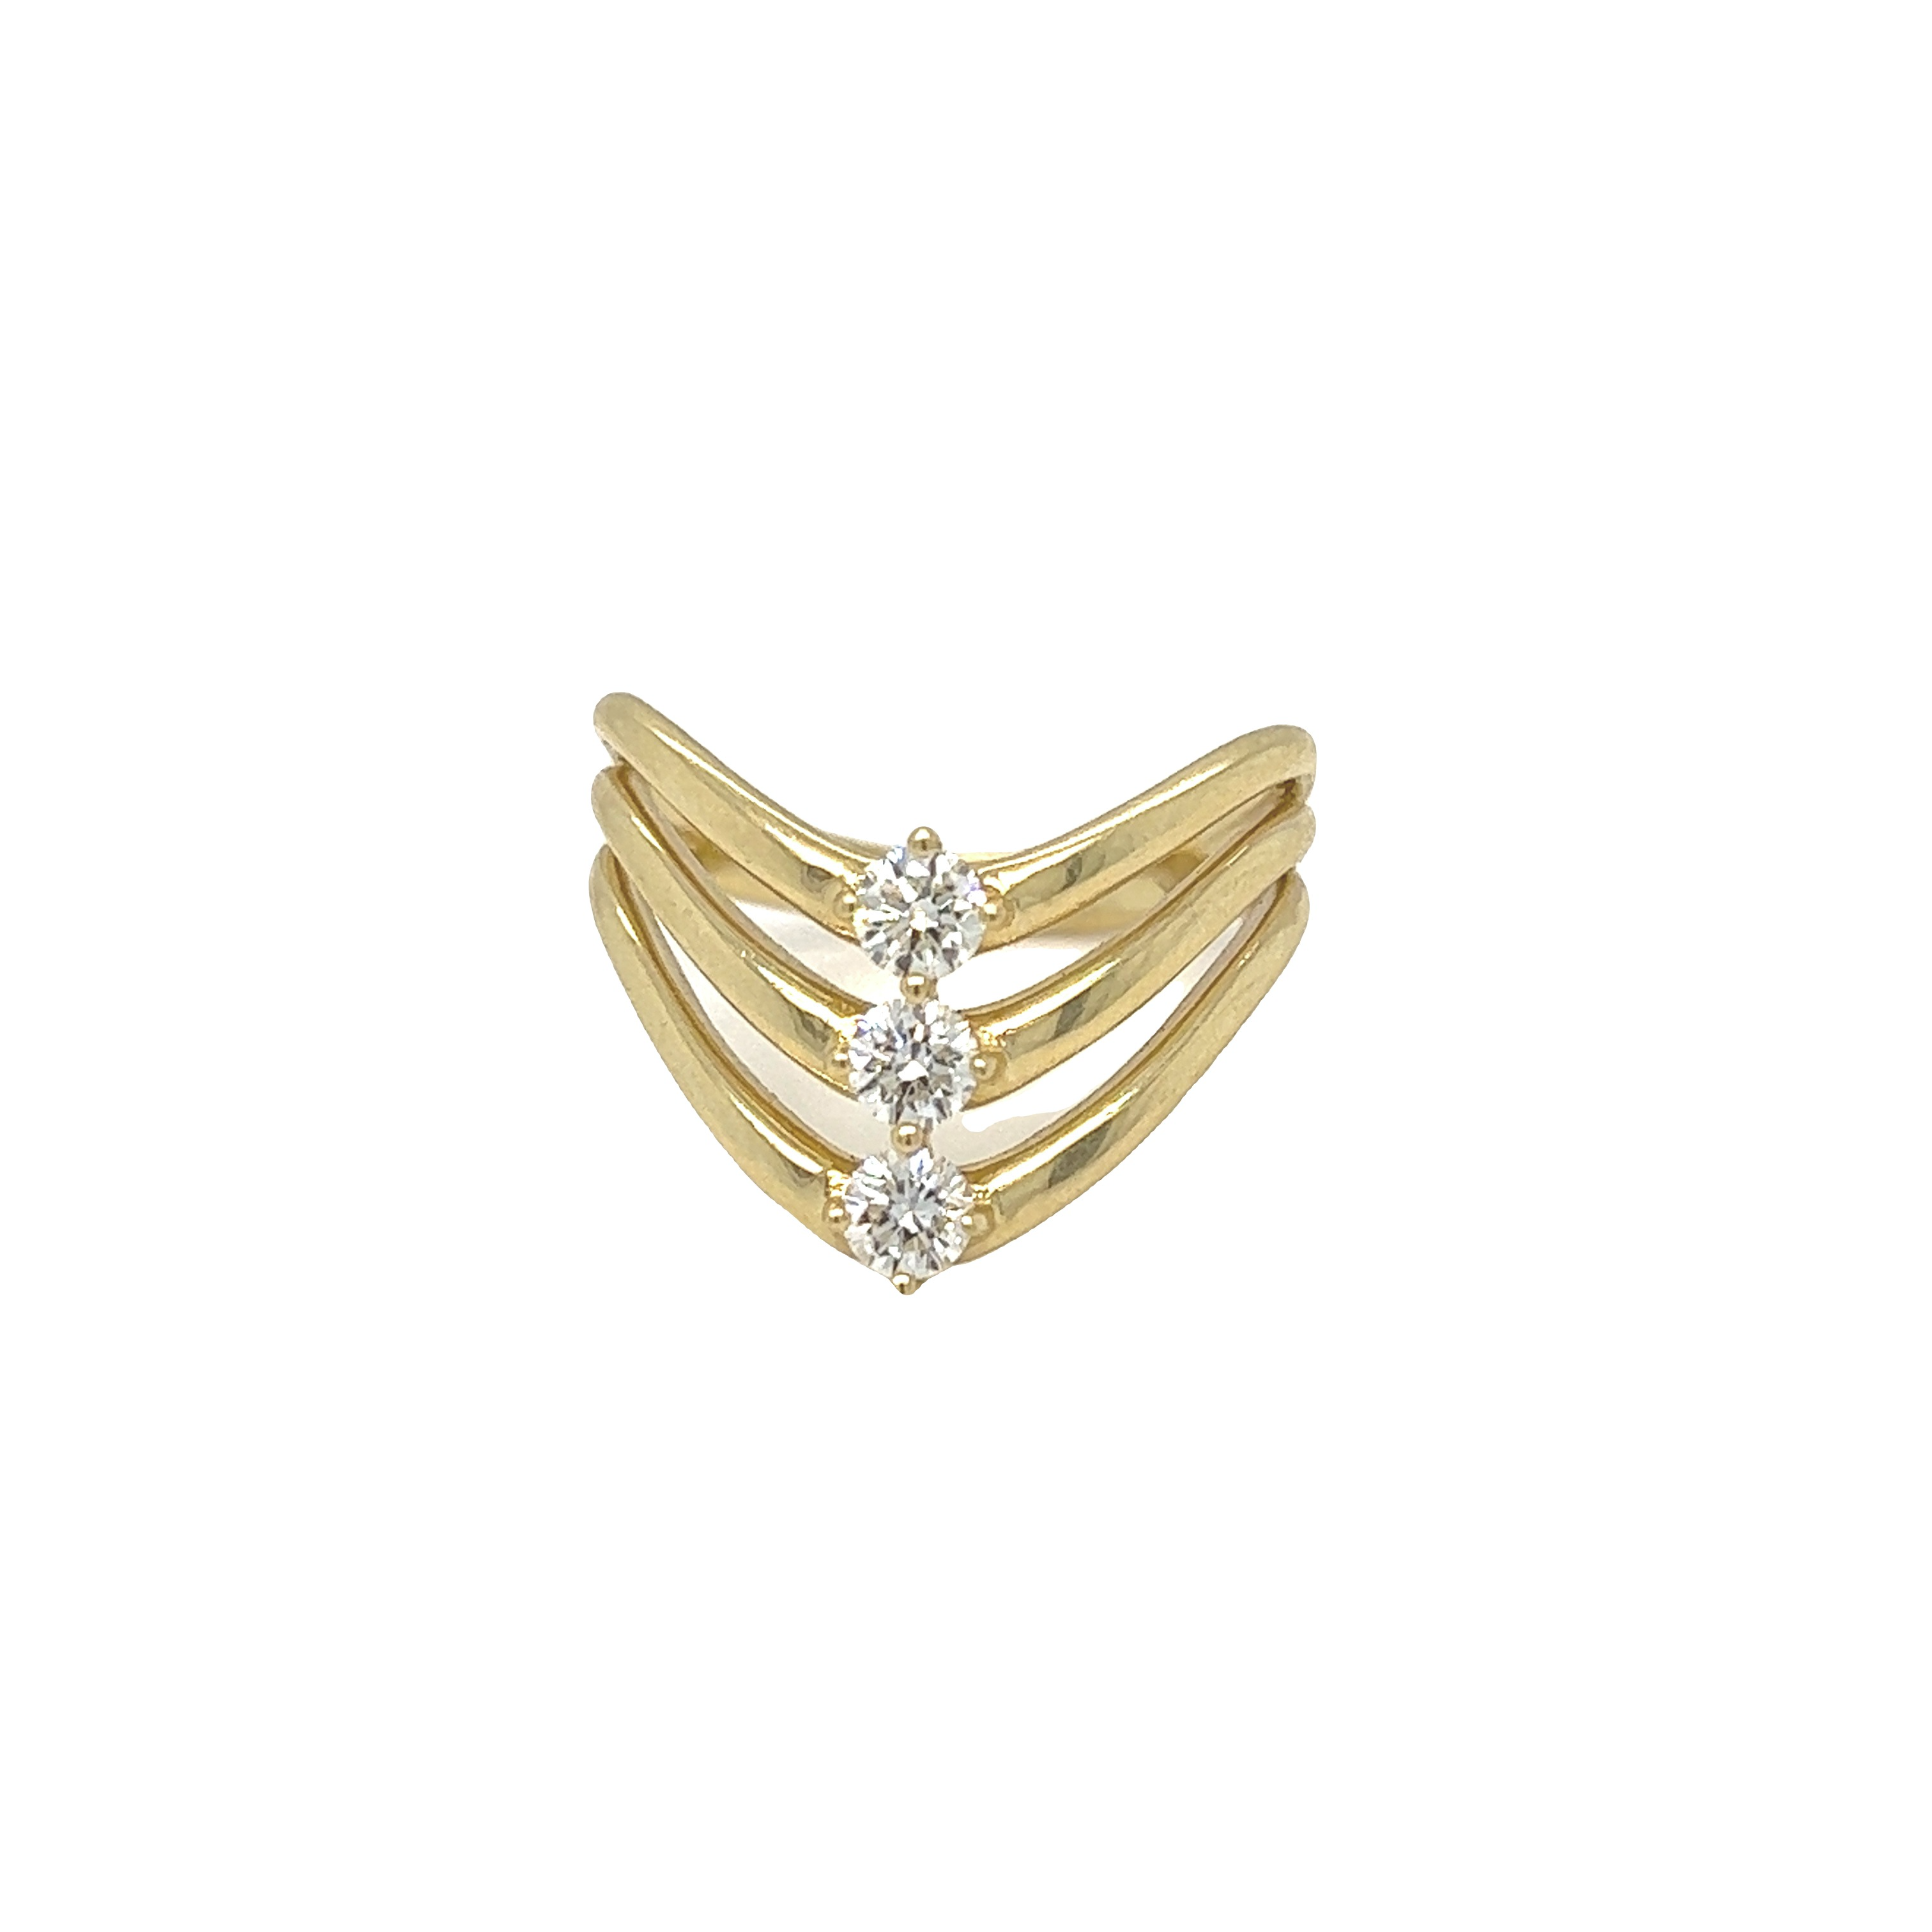 Featured image for “3 Diamond Layered Curve Ring”